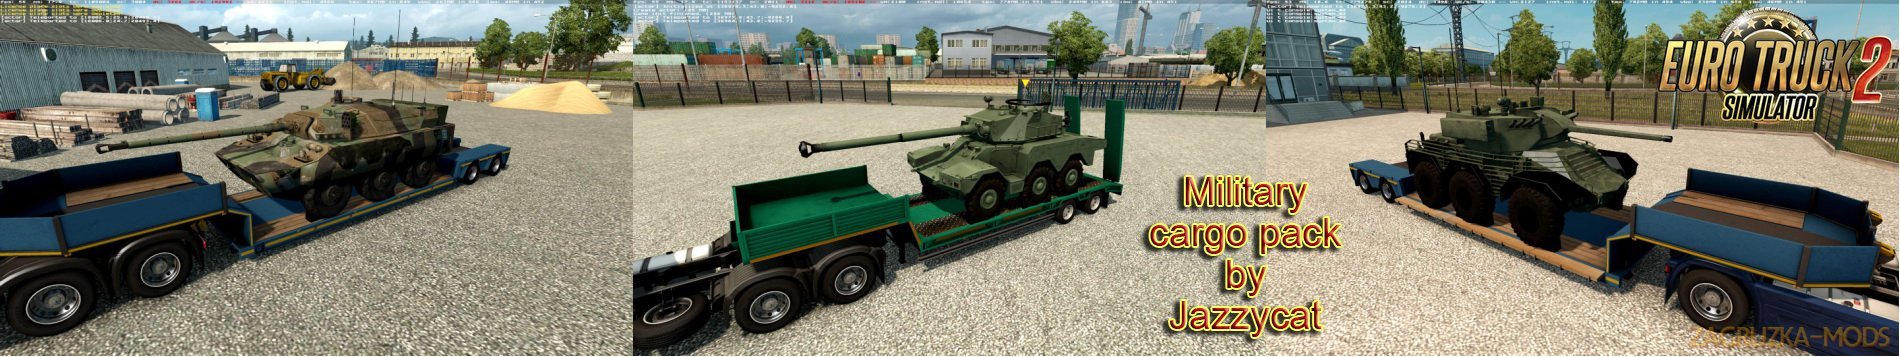 Military Cargo Pack v2.1 by Jazzycat